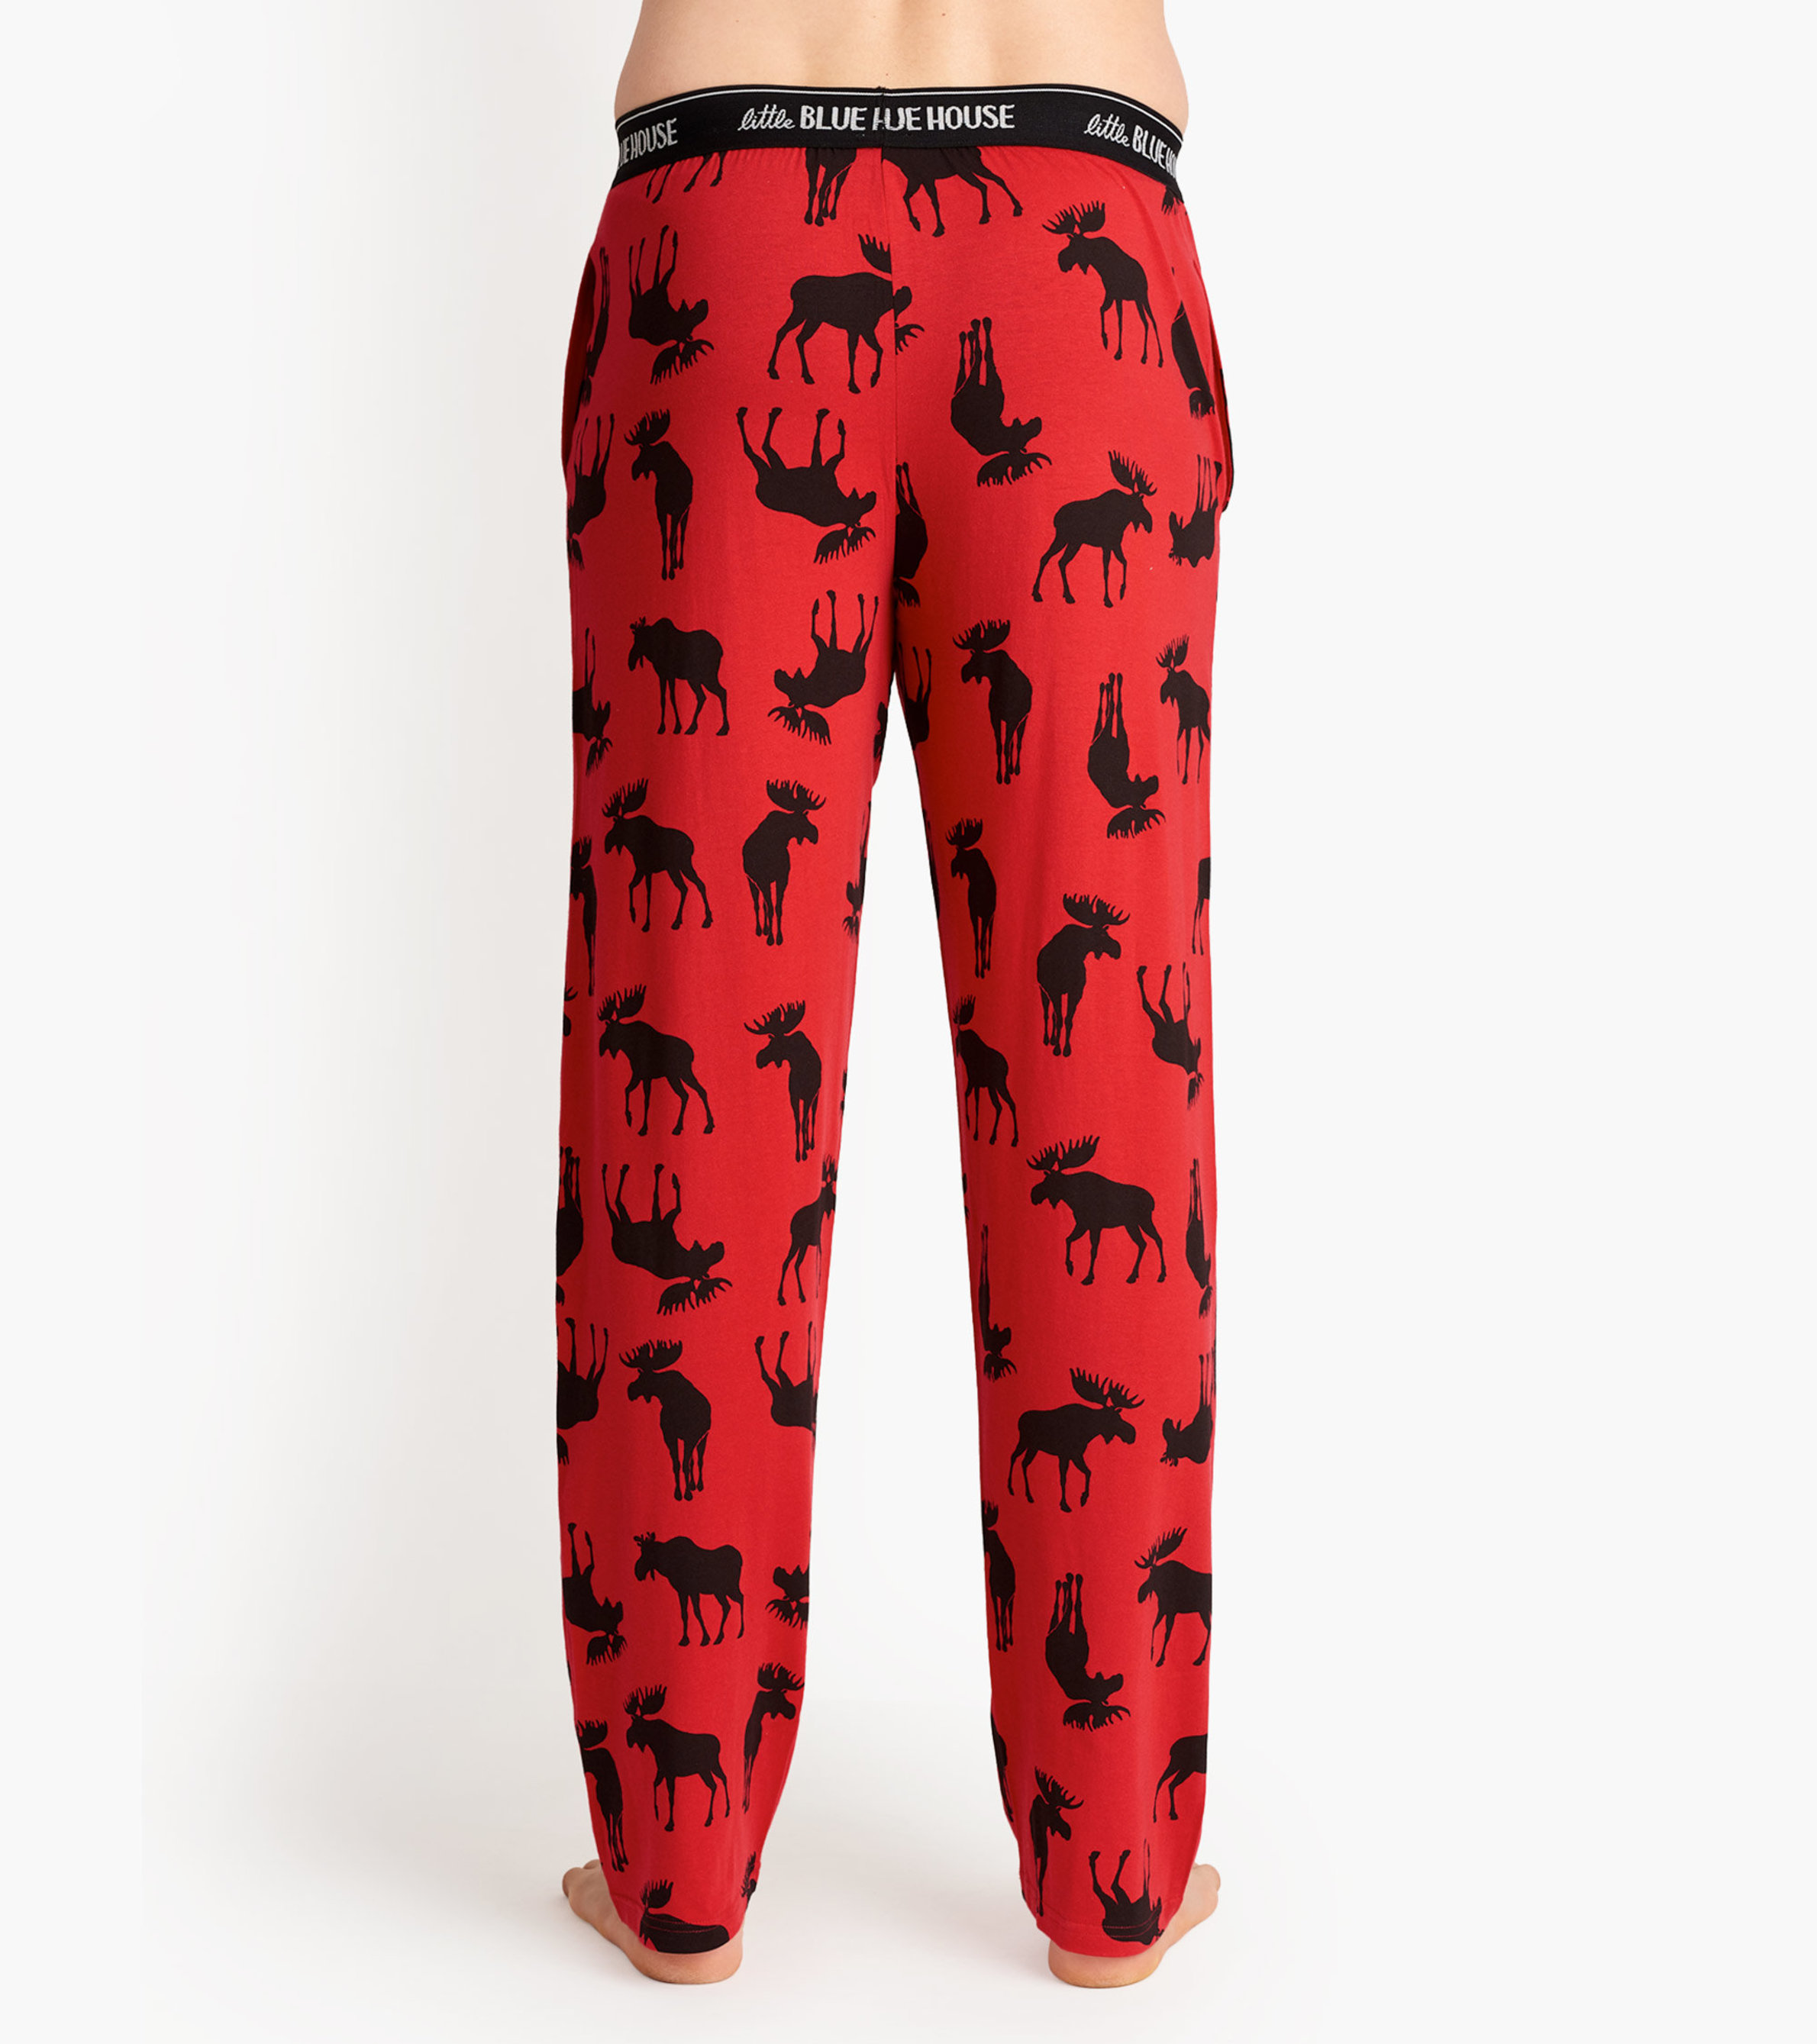 https://cdn.littlebluehouse.com/product_images/moose-on-red-mens-jersey-pajama-pants/PA4WIMO101_A_jpg/pdp_zoom.jpg?c=1590164760&locale=us_en